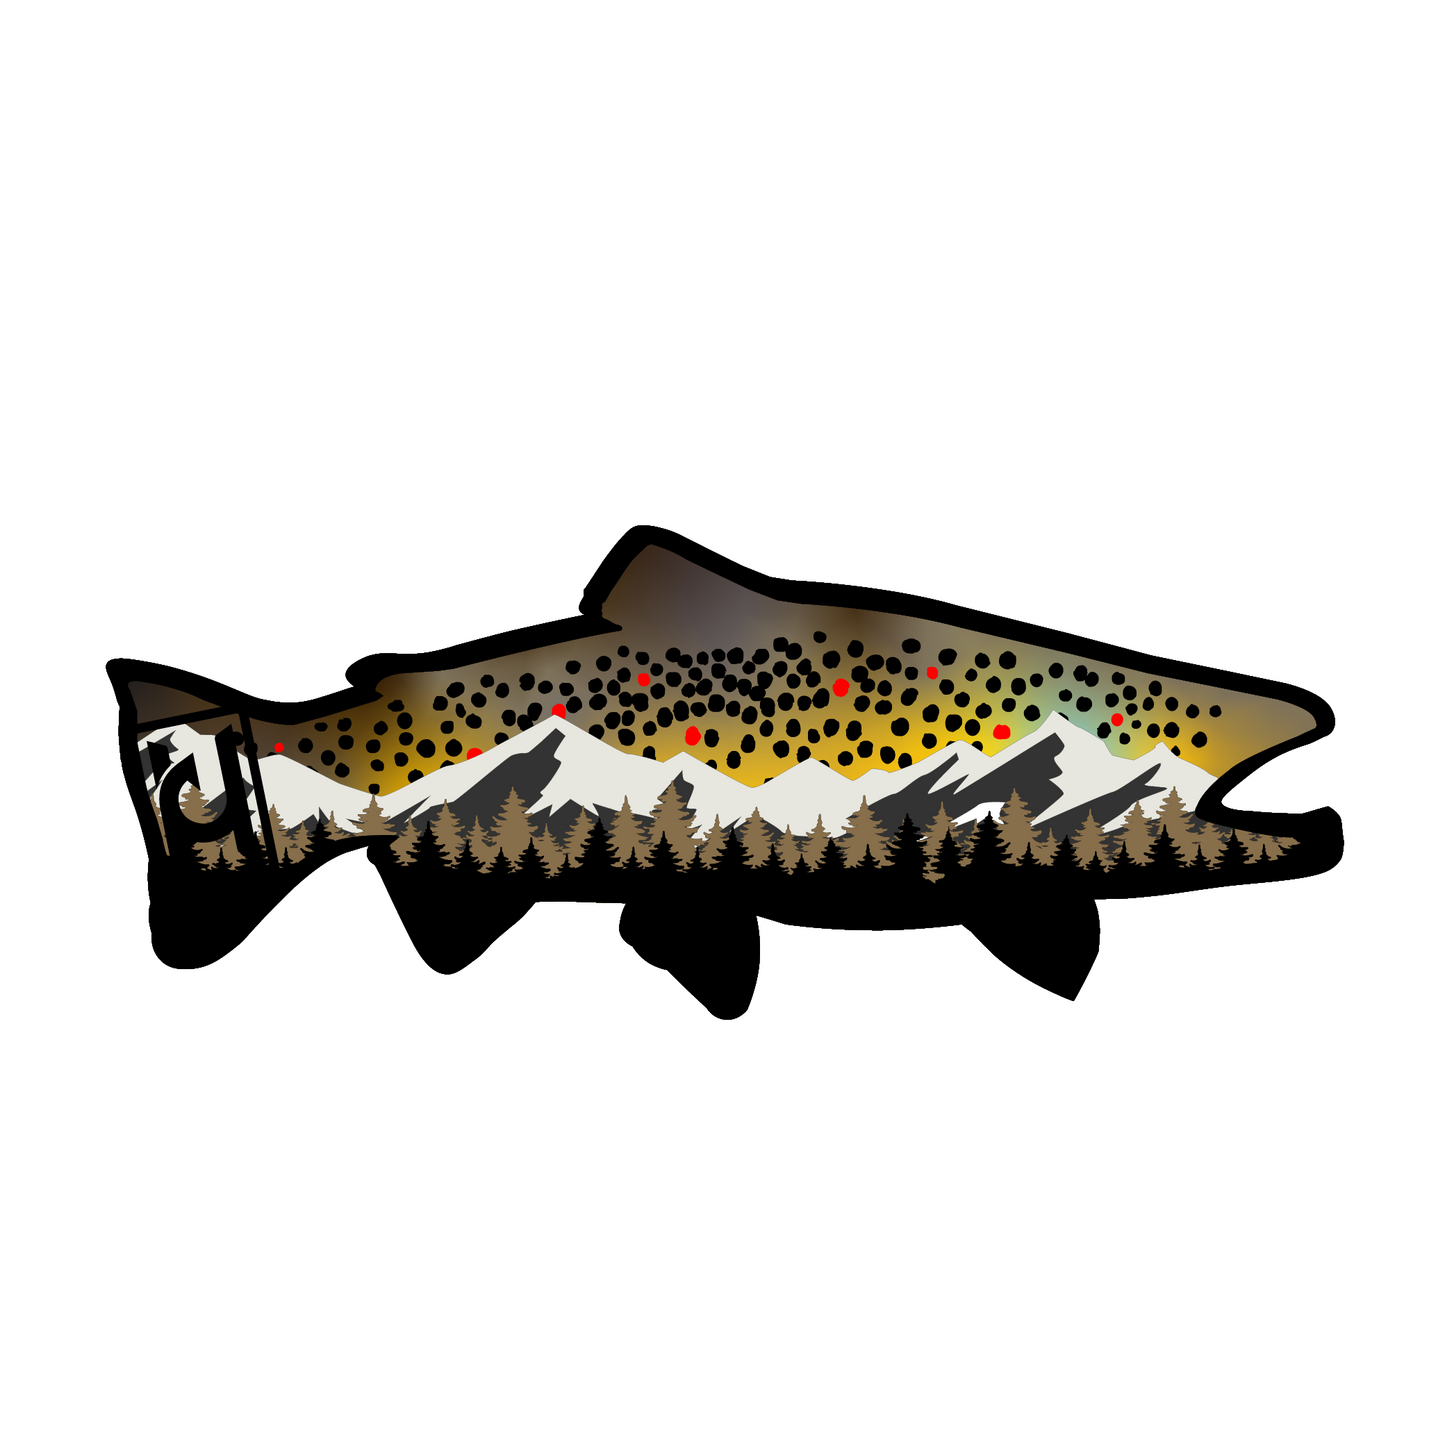 Brown Trout sticker modeled after our wood art! Includes the beautiful features of the brown trout along with mountain and pine tree accents. 